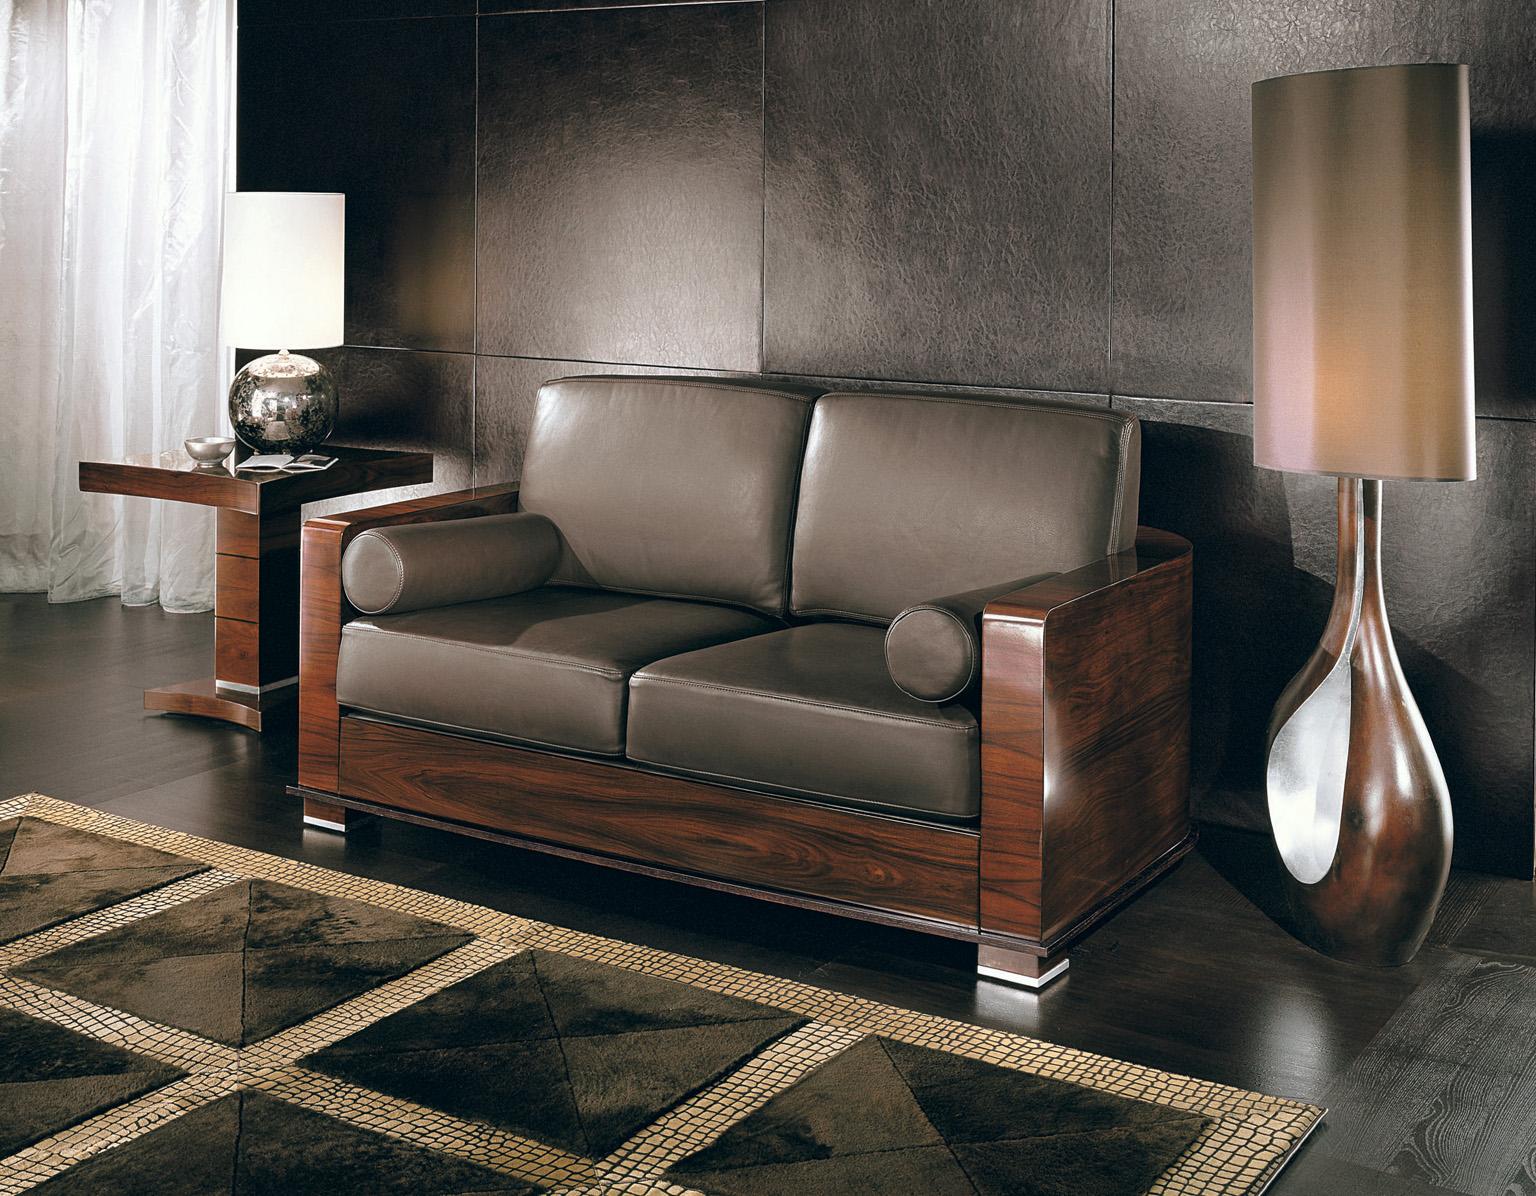 Giorgio Italian Paradiso Sofa Brazilian Rosewood Satin Finish Wood Brown Leather In New Condition For Sale In New York, NY